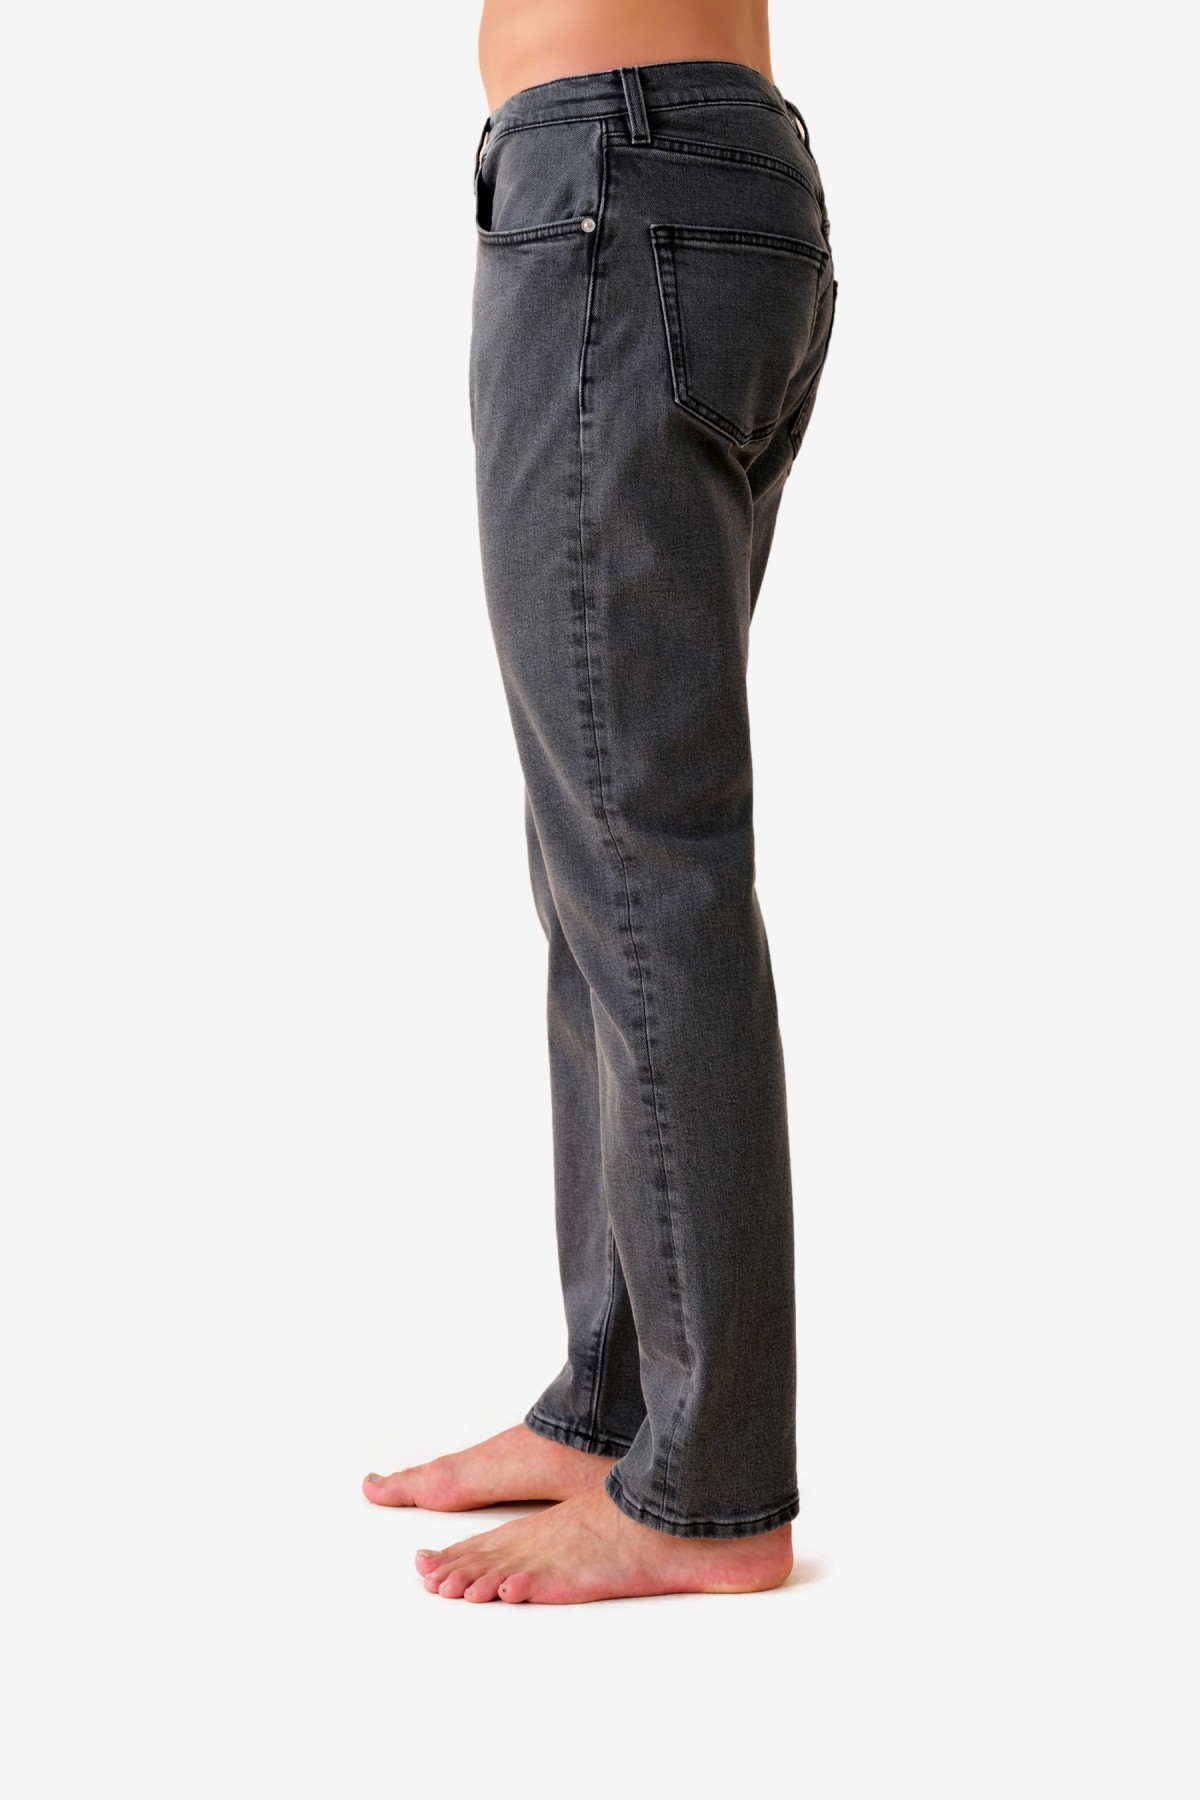 Jeanerica TM005 Tapered Jeans in Soft Grey